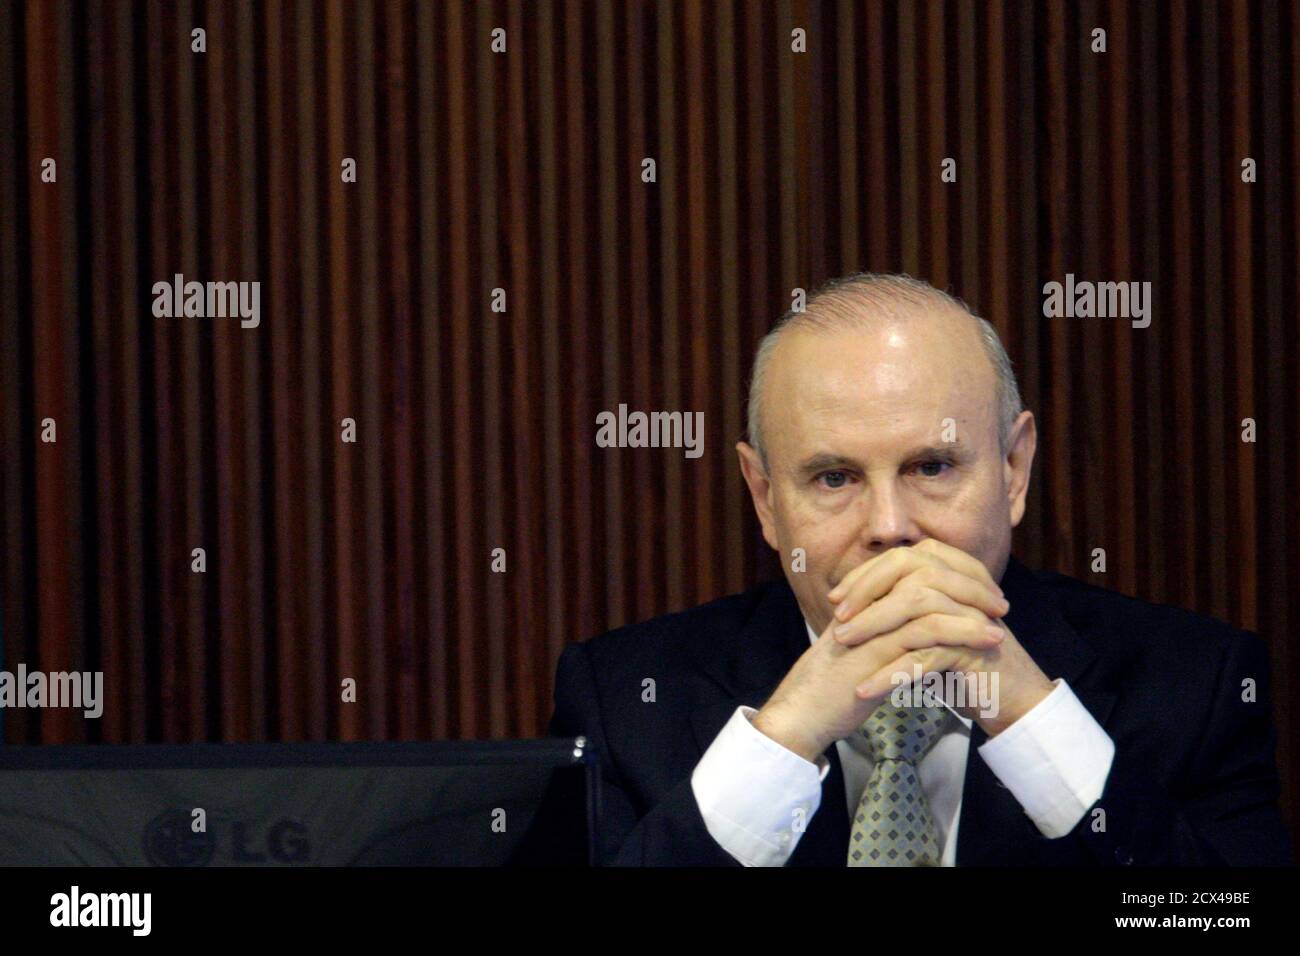 Brazil's Finance Minister Guido Mantega attends a meeting with a political council in Brasilia August 29, 2011. Brazilian President Dilma Rousseff will outline a tight budget for next year on Monday, government sources said, reaffirming her commitment to spending control and paving the way for interest rate cuts.    REUTERS/Ueslei Marcelino (BRAZIL - Tags: POLITICS BUSINESS) Stock Photo